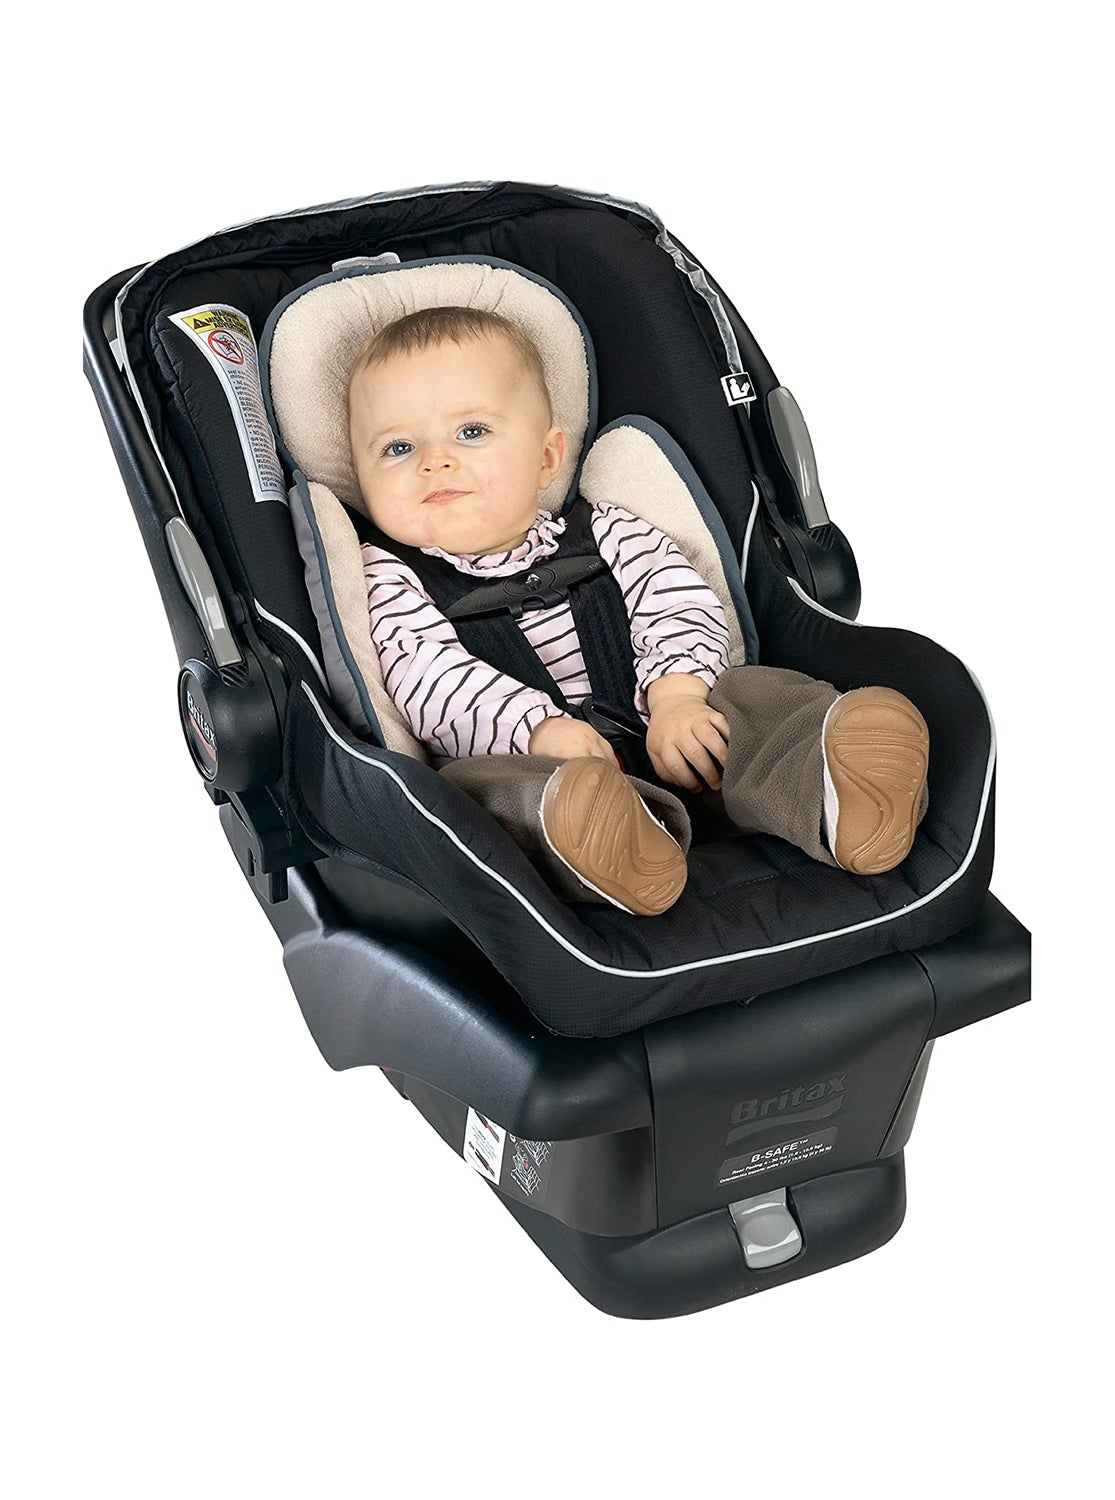 Britax Adjustable Head and Body Support Pillow for Car Seats and Strollers - ANB Baby -$20 - $50